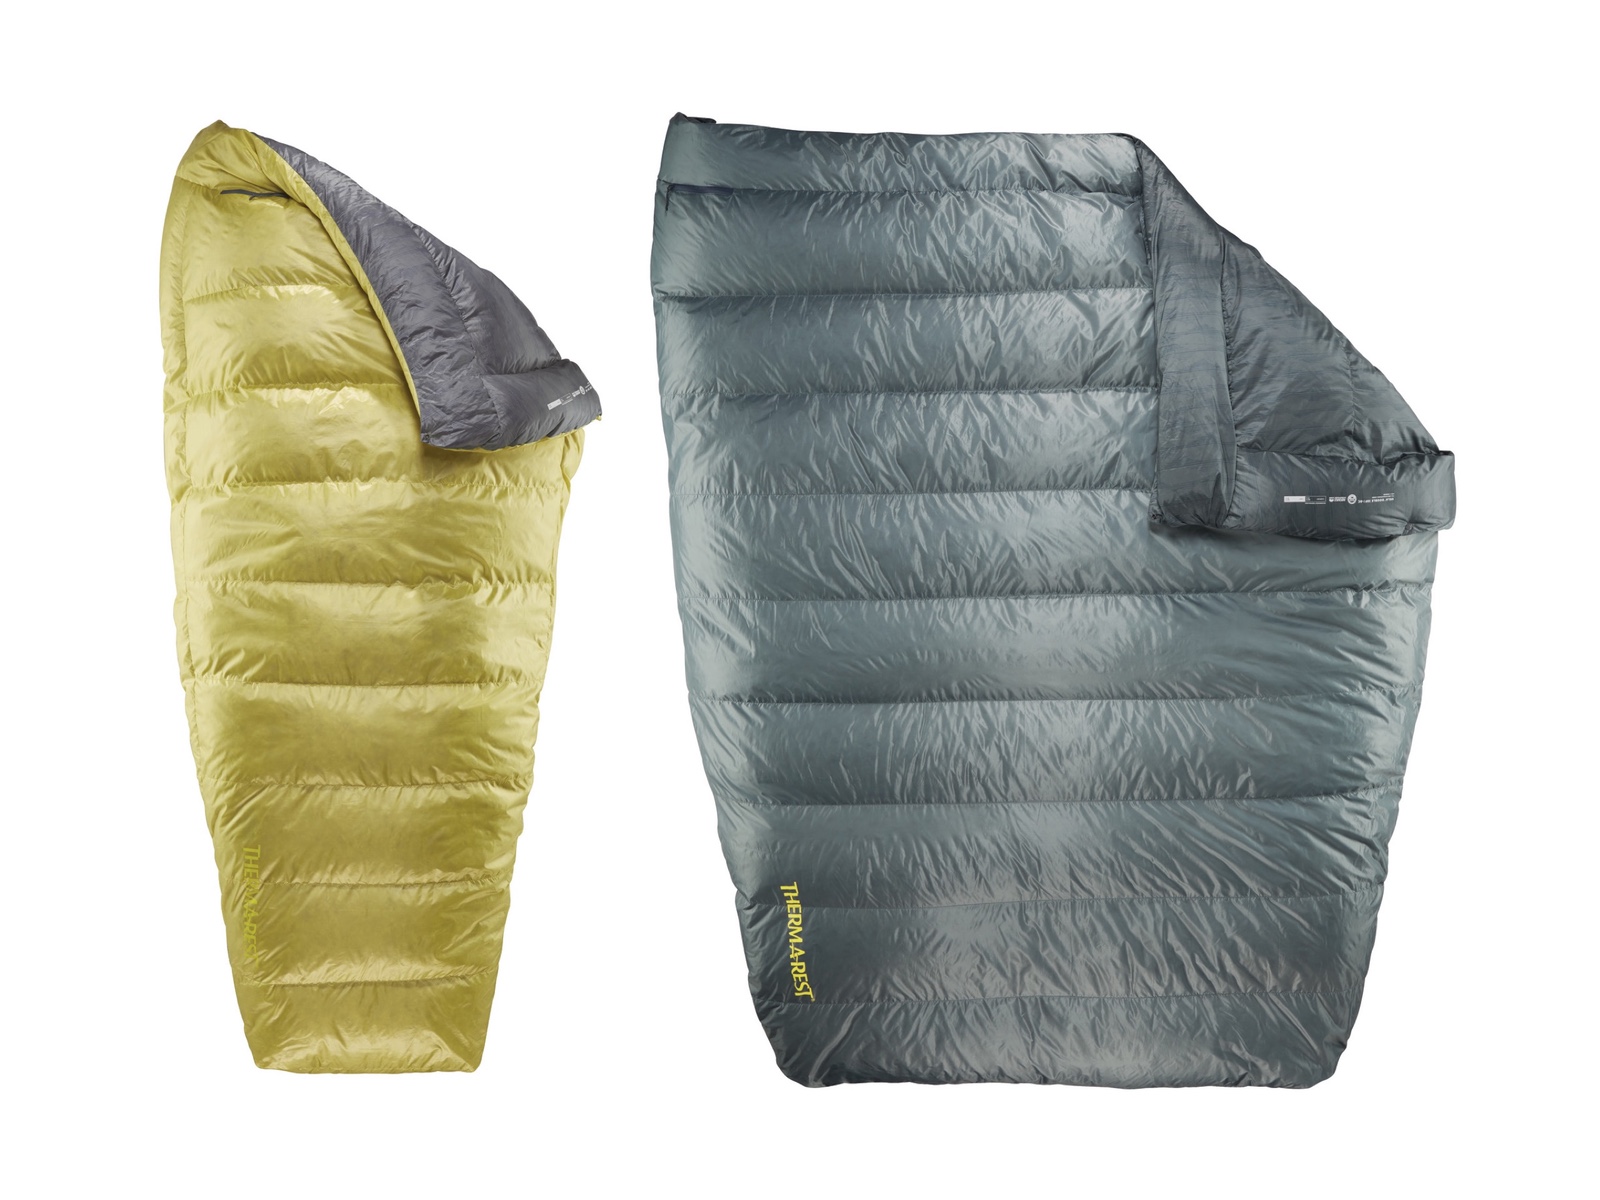 Gear news: Therm-a-Rest updates lineup of lightweight sleeping bags and ...